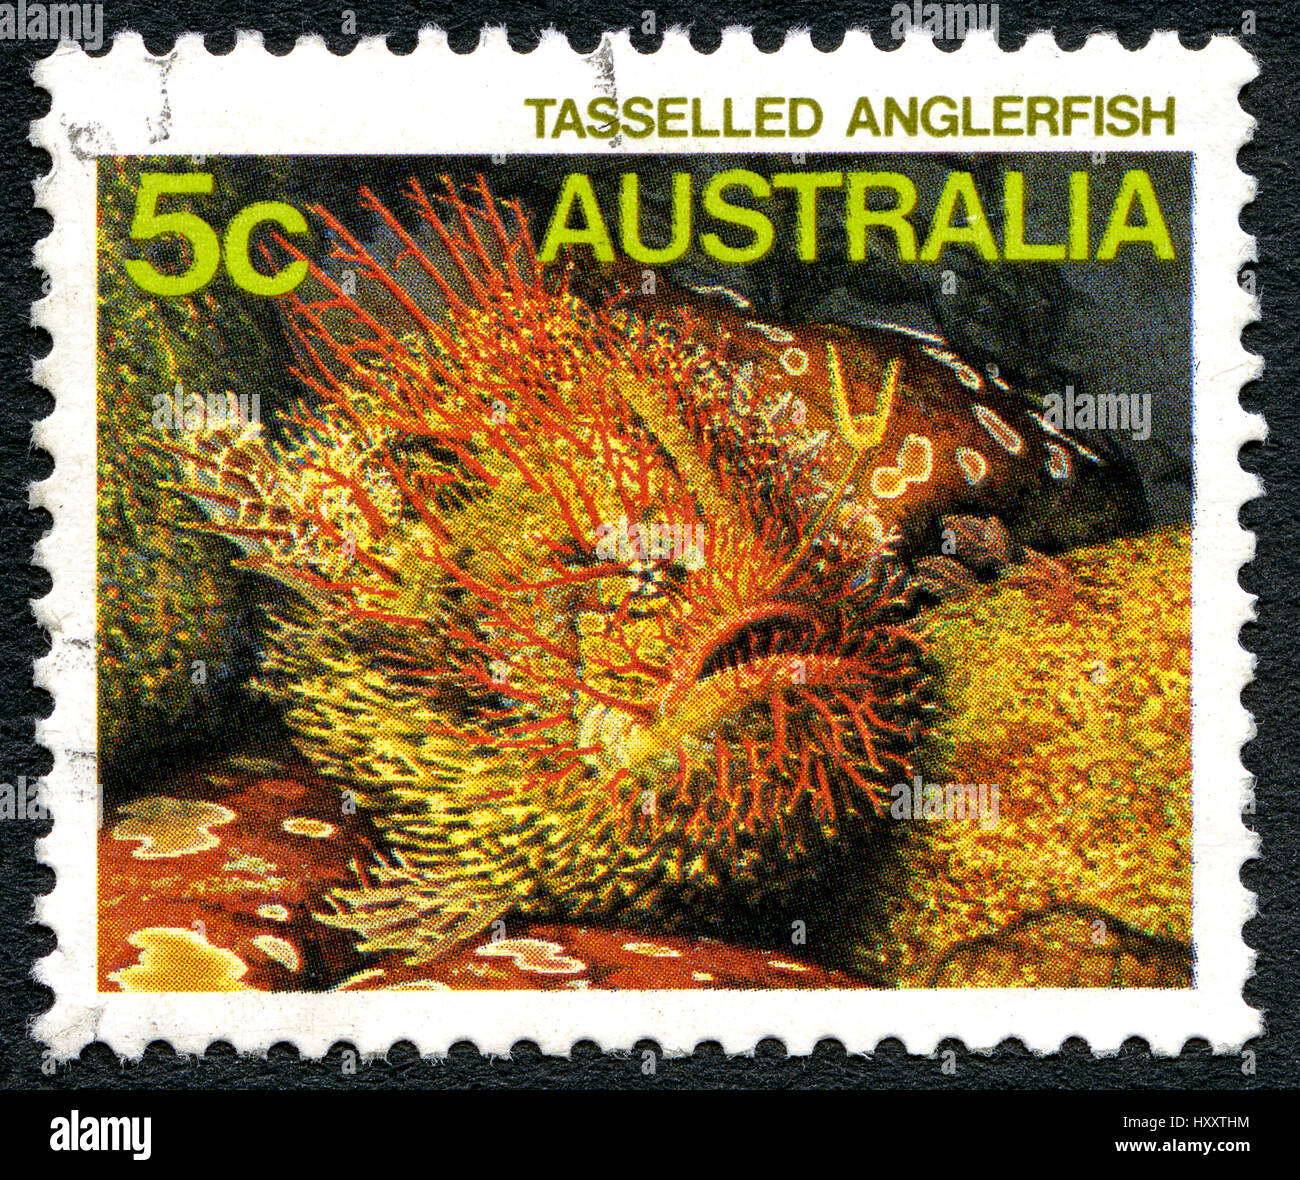 AUSTRALIA - CIRCA 1985: A used postage stamp from Australia, depicting an image of a Tasselled Anglerfish, circa 1985. Stock Photo